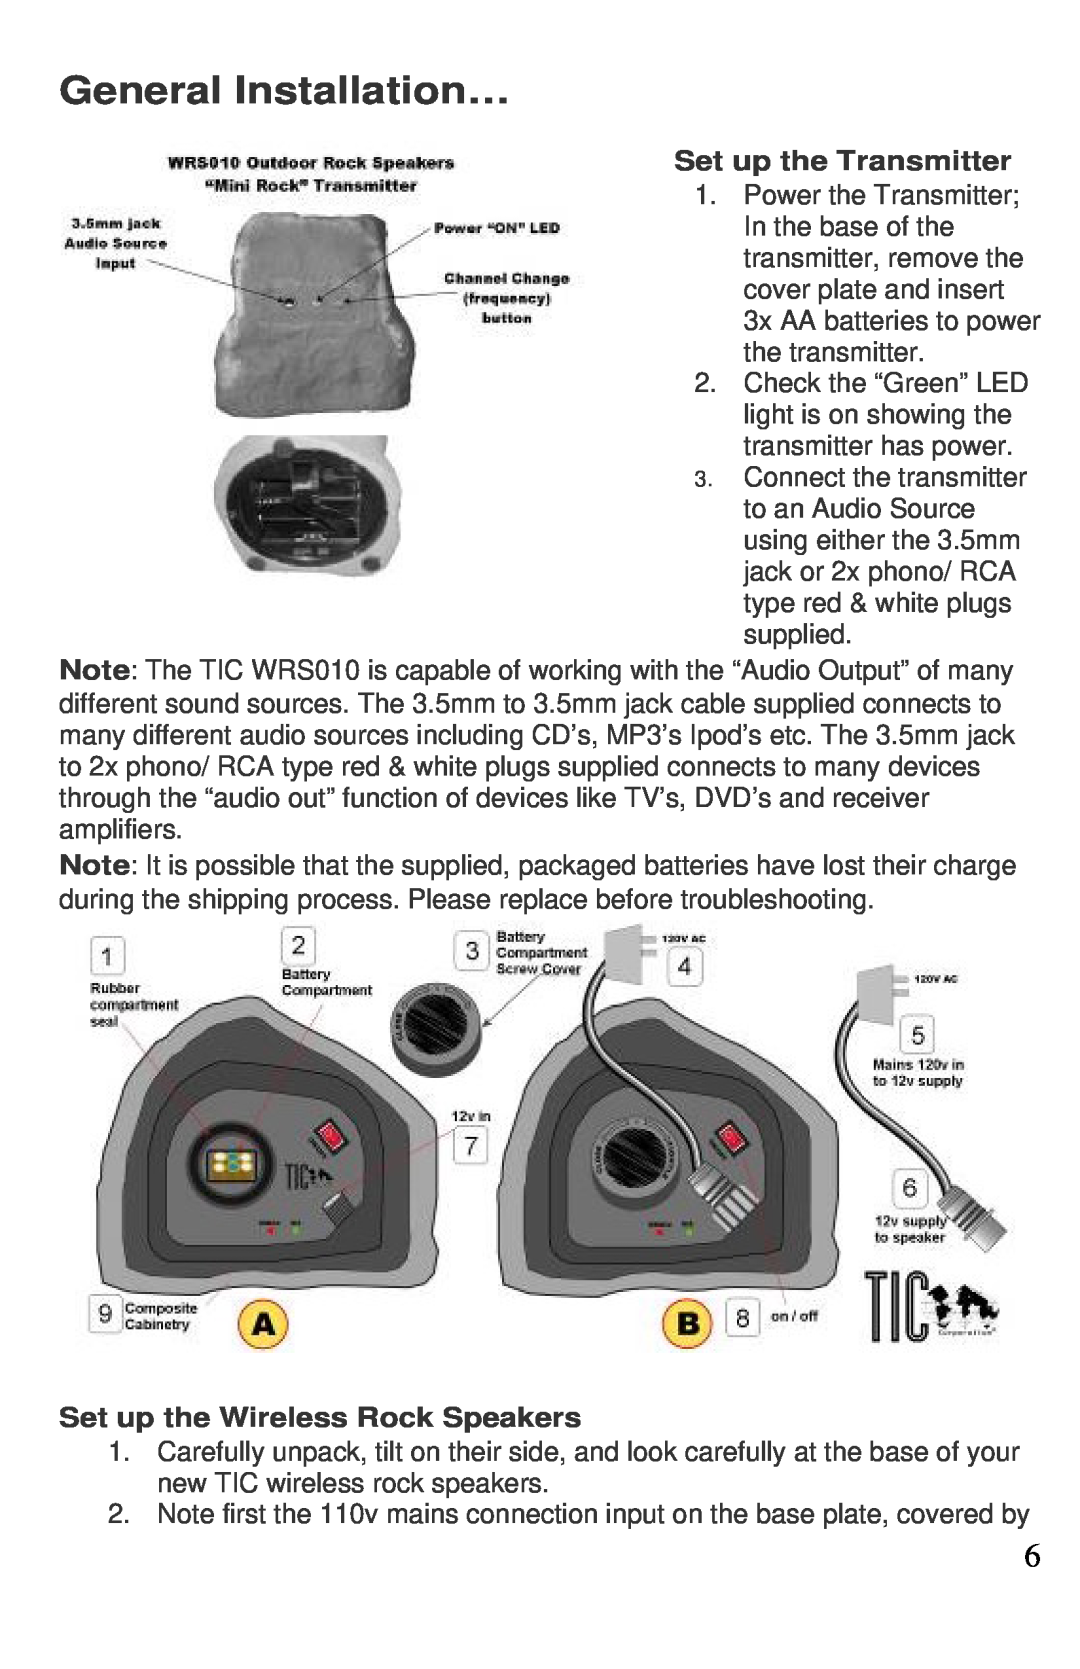 TIC WRS010 manual General Installation…, Set up the Transmitter, Set up the Wireless Rock Speakers 